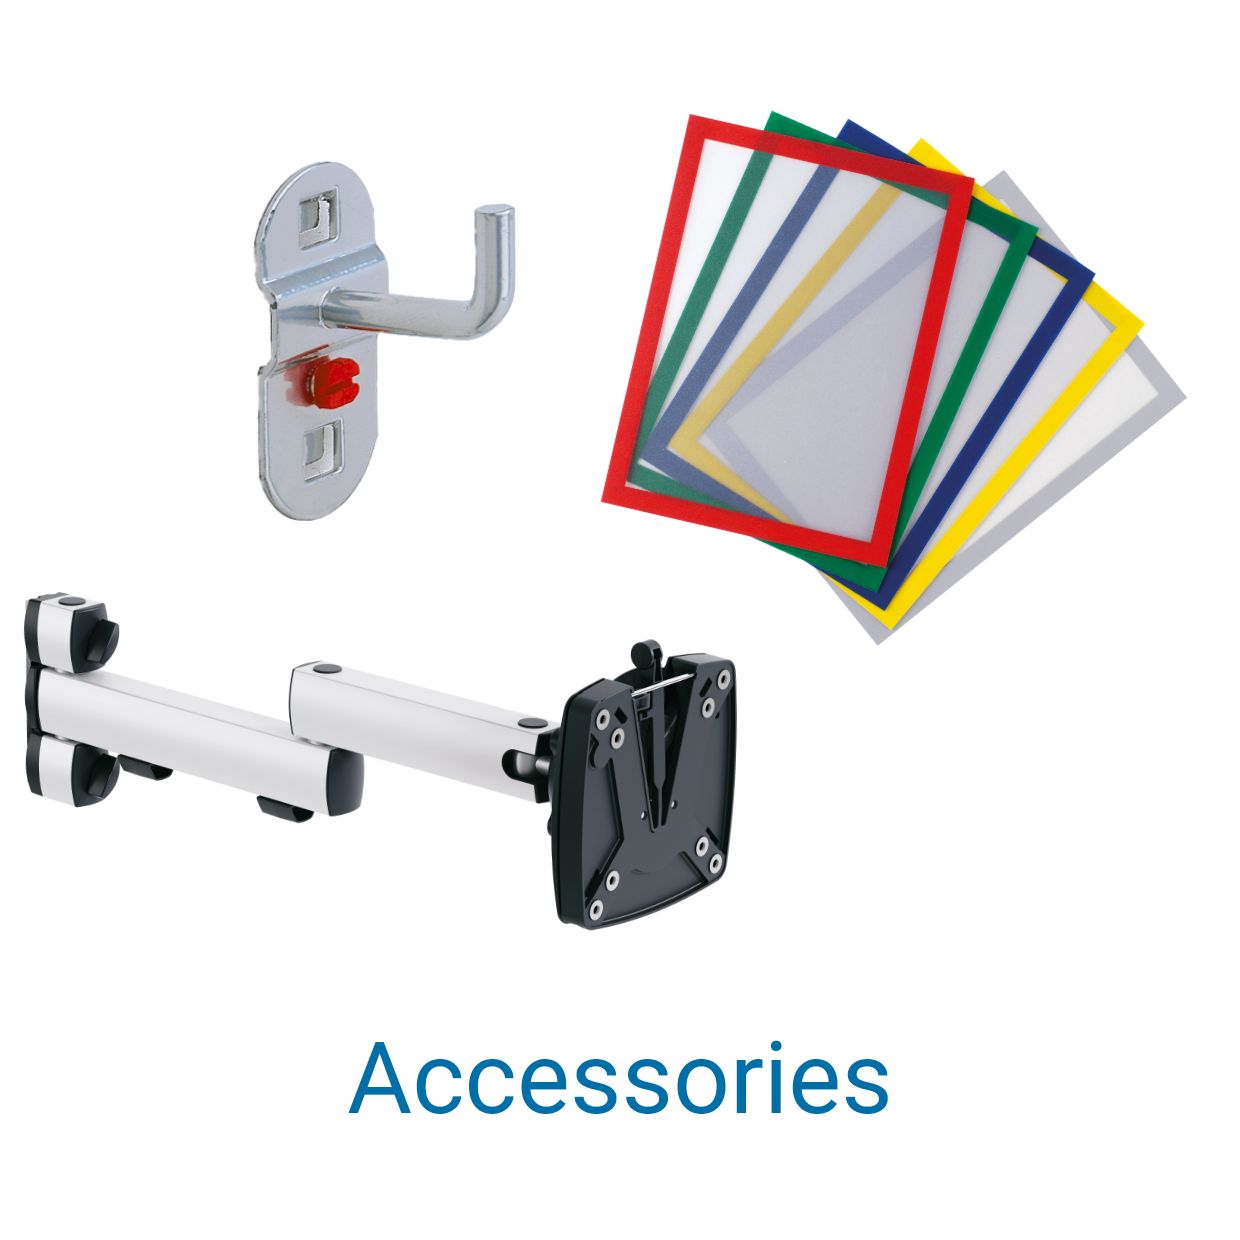 Additional accessories from BeeWaTec